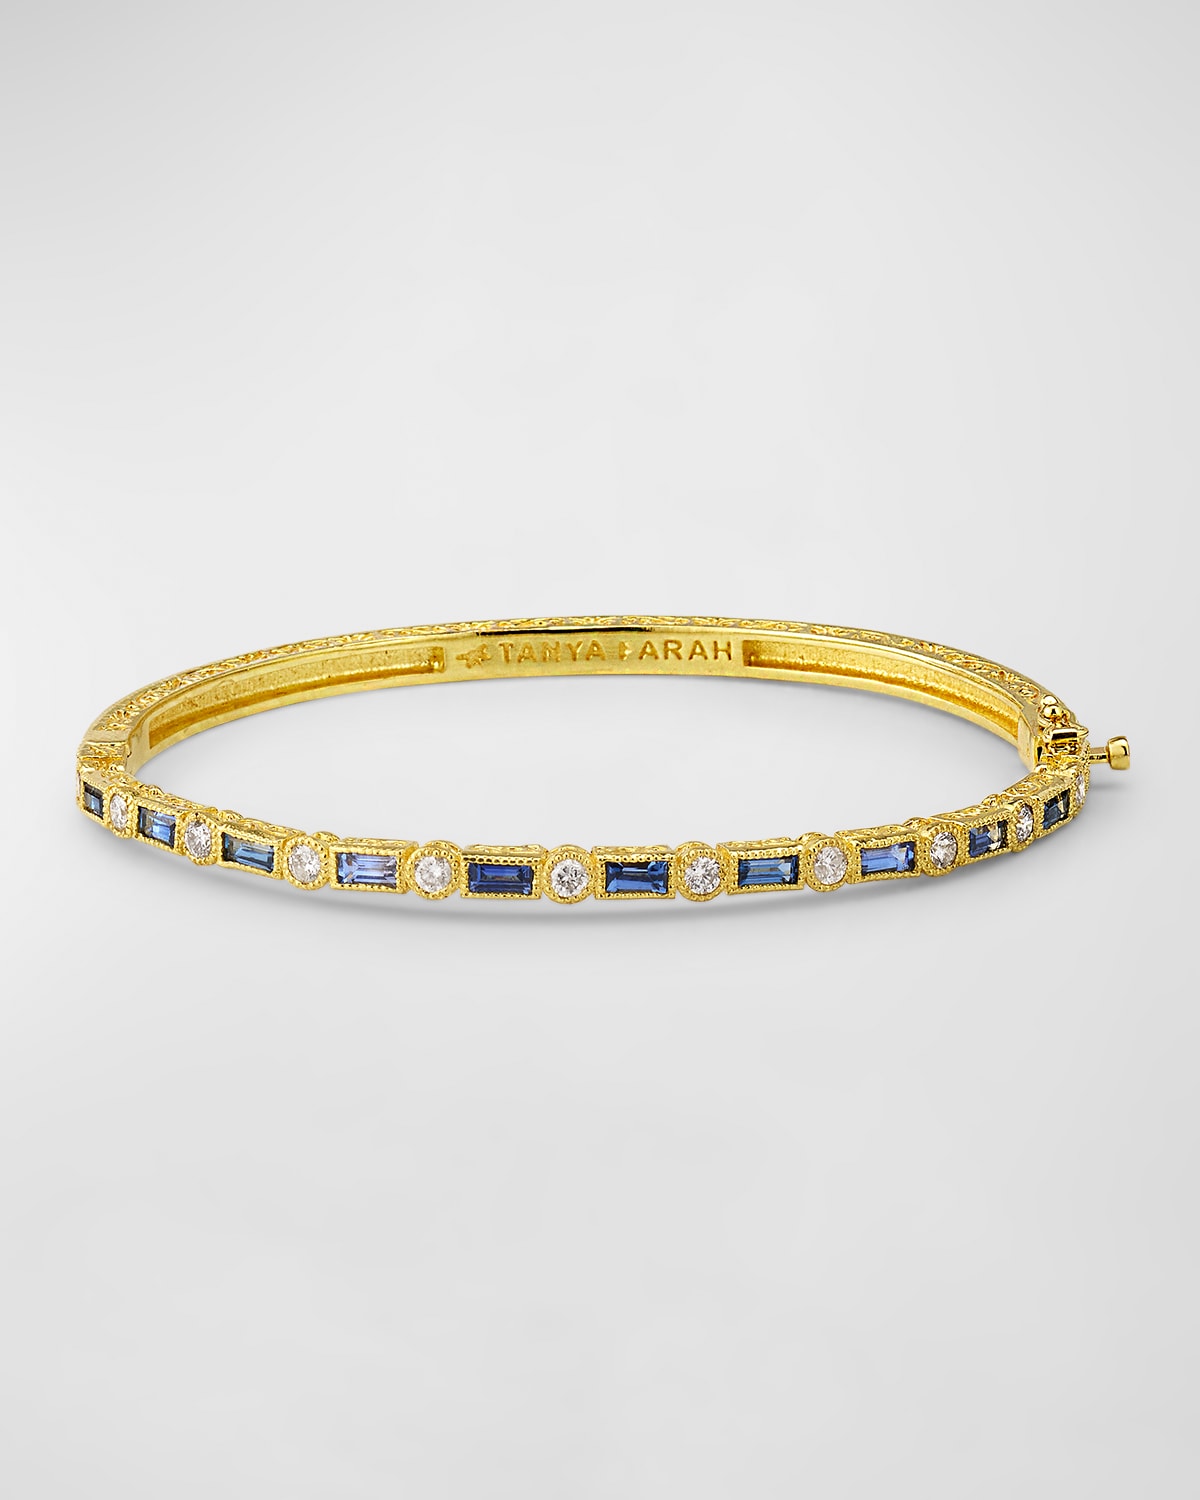 18K Yellow Gold Bangle Bracelet with Blue Sapphires and Diamonds